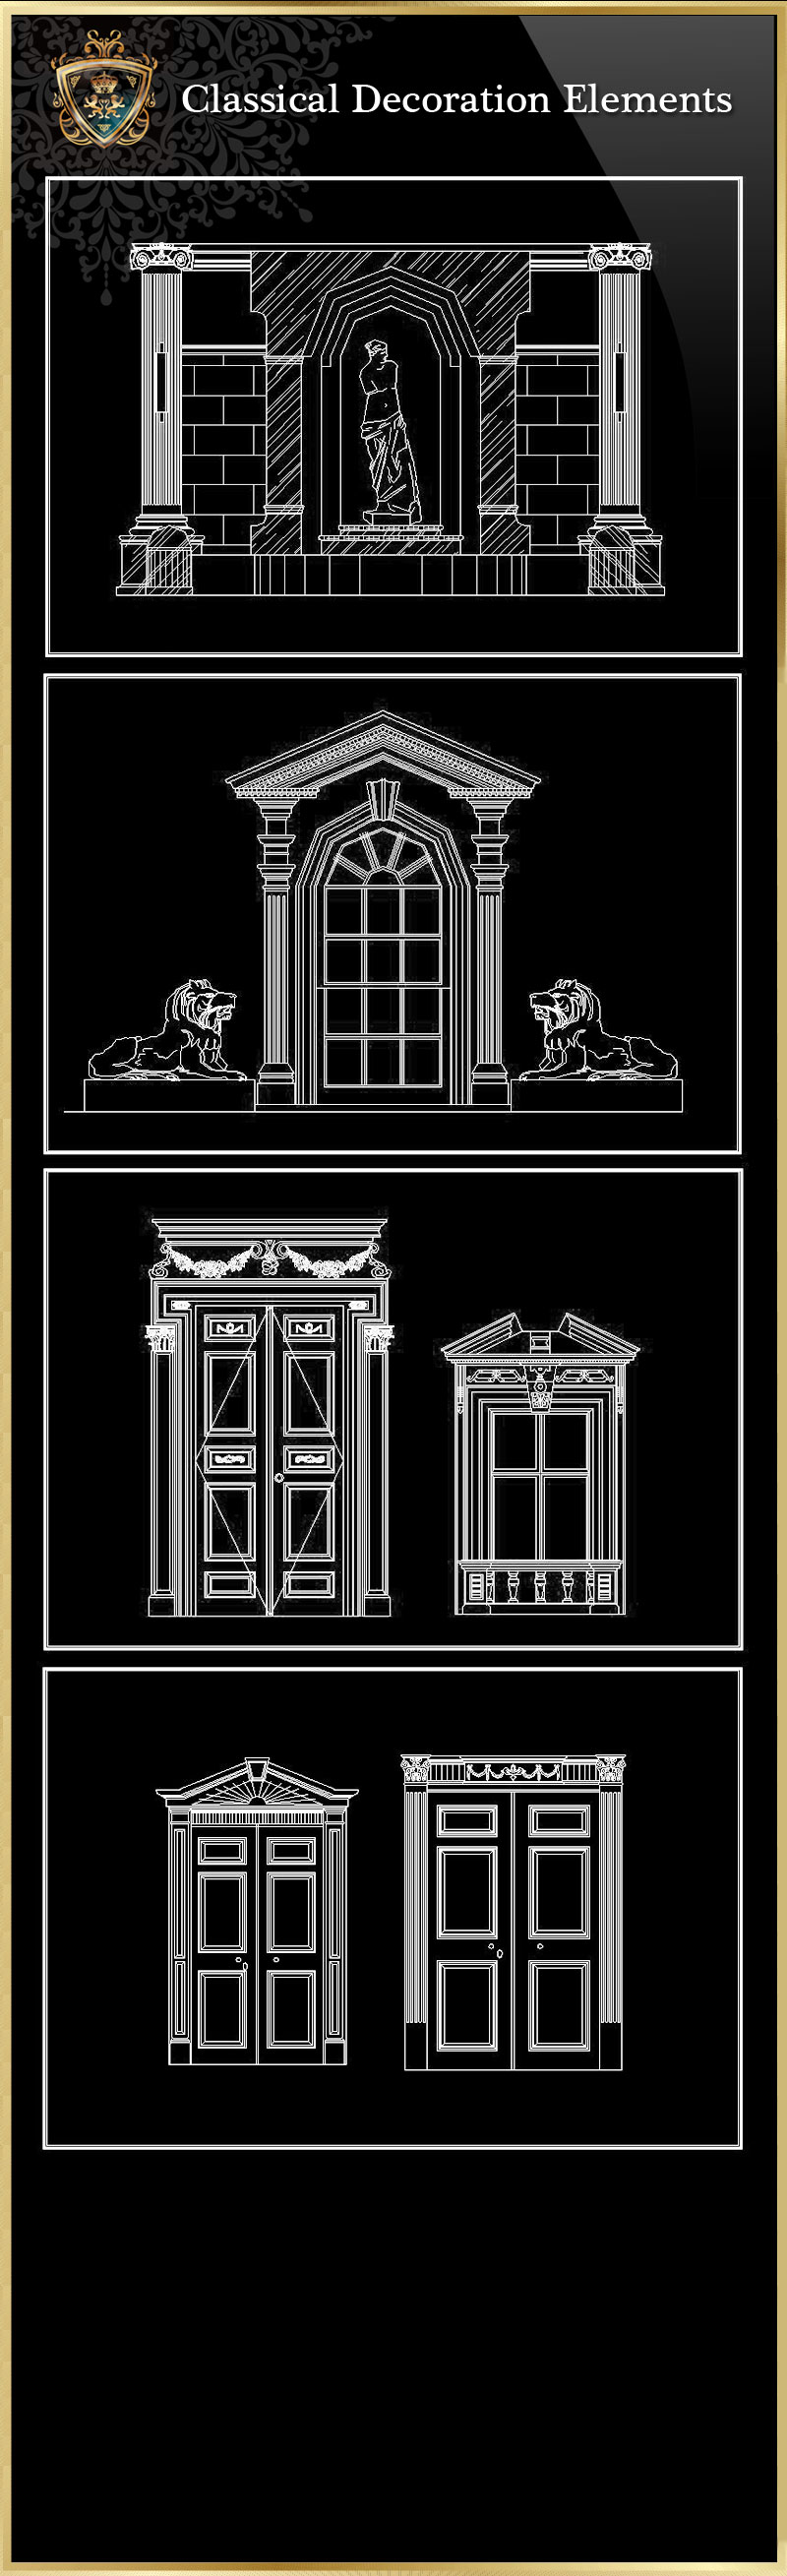 ★【Classical Decoration Elements 03】Download Luxury Architectural Design CAD Drawings--Over 20000+ High quality CAD Blocks and Drawings Download!